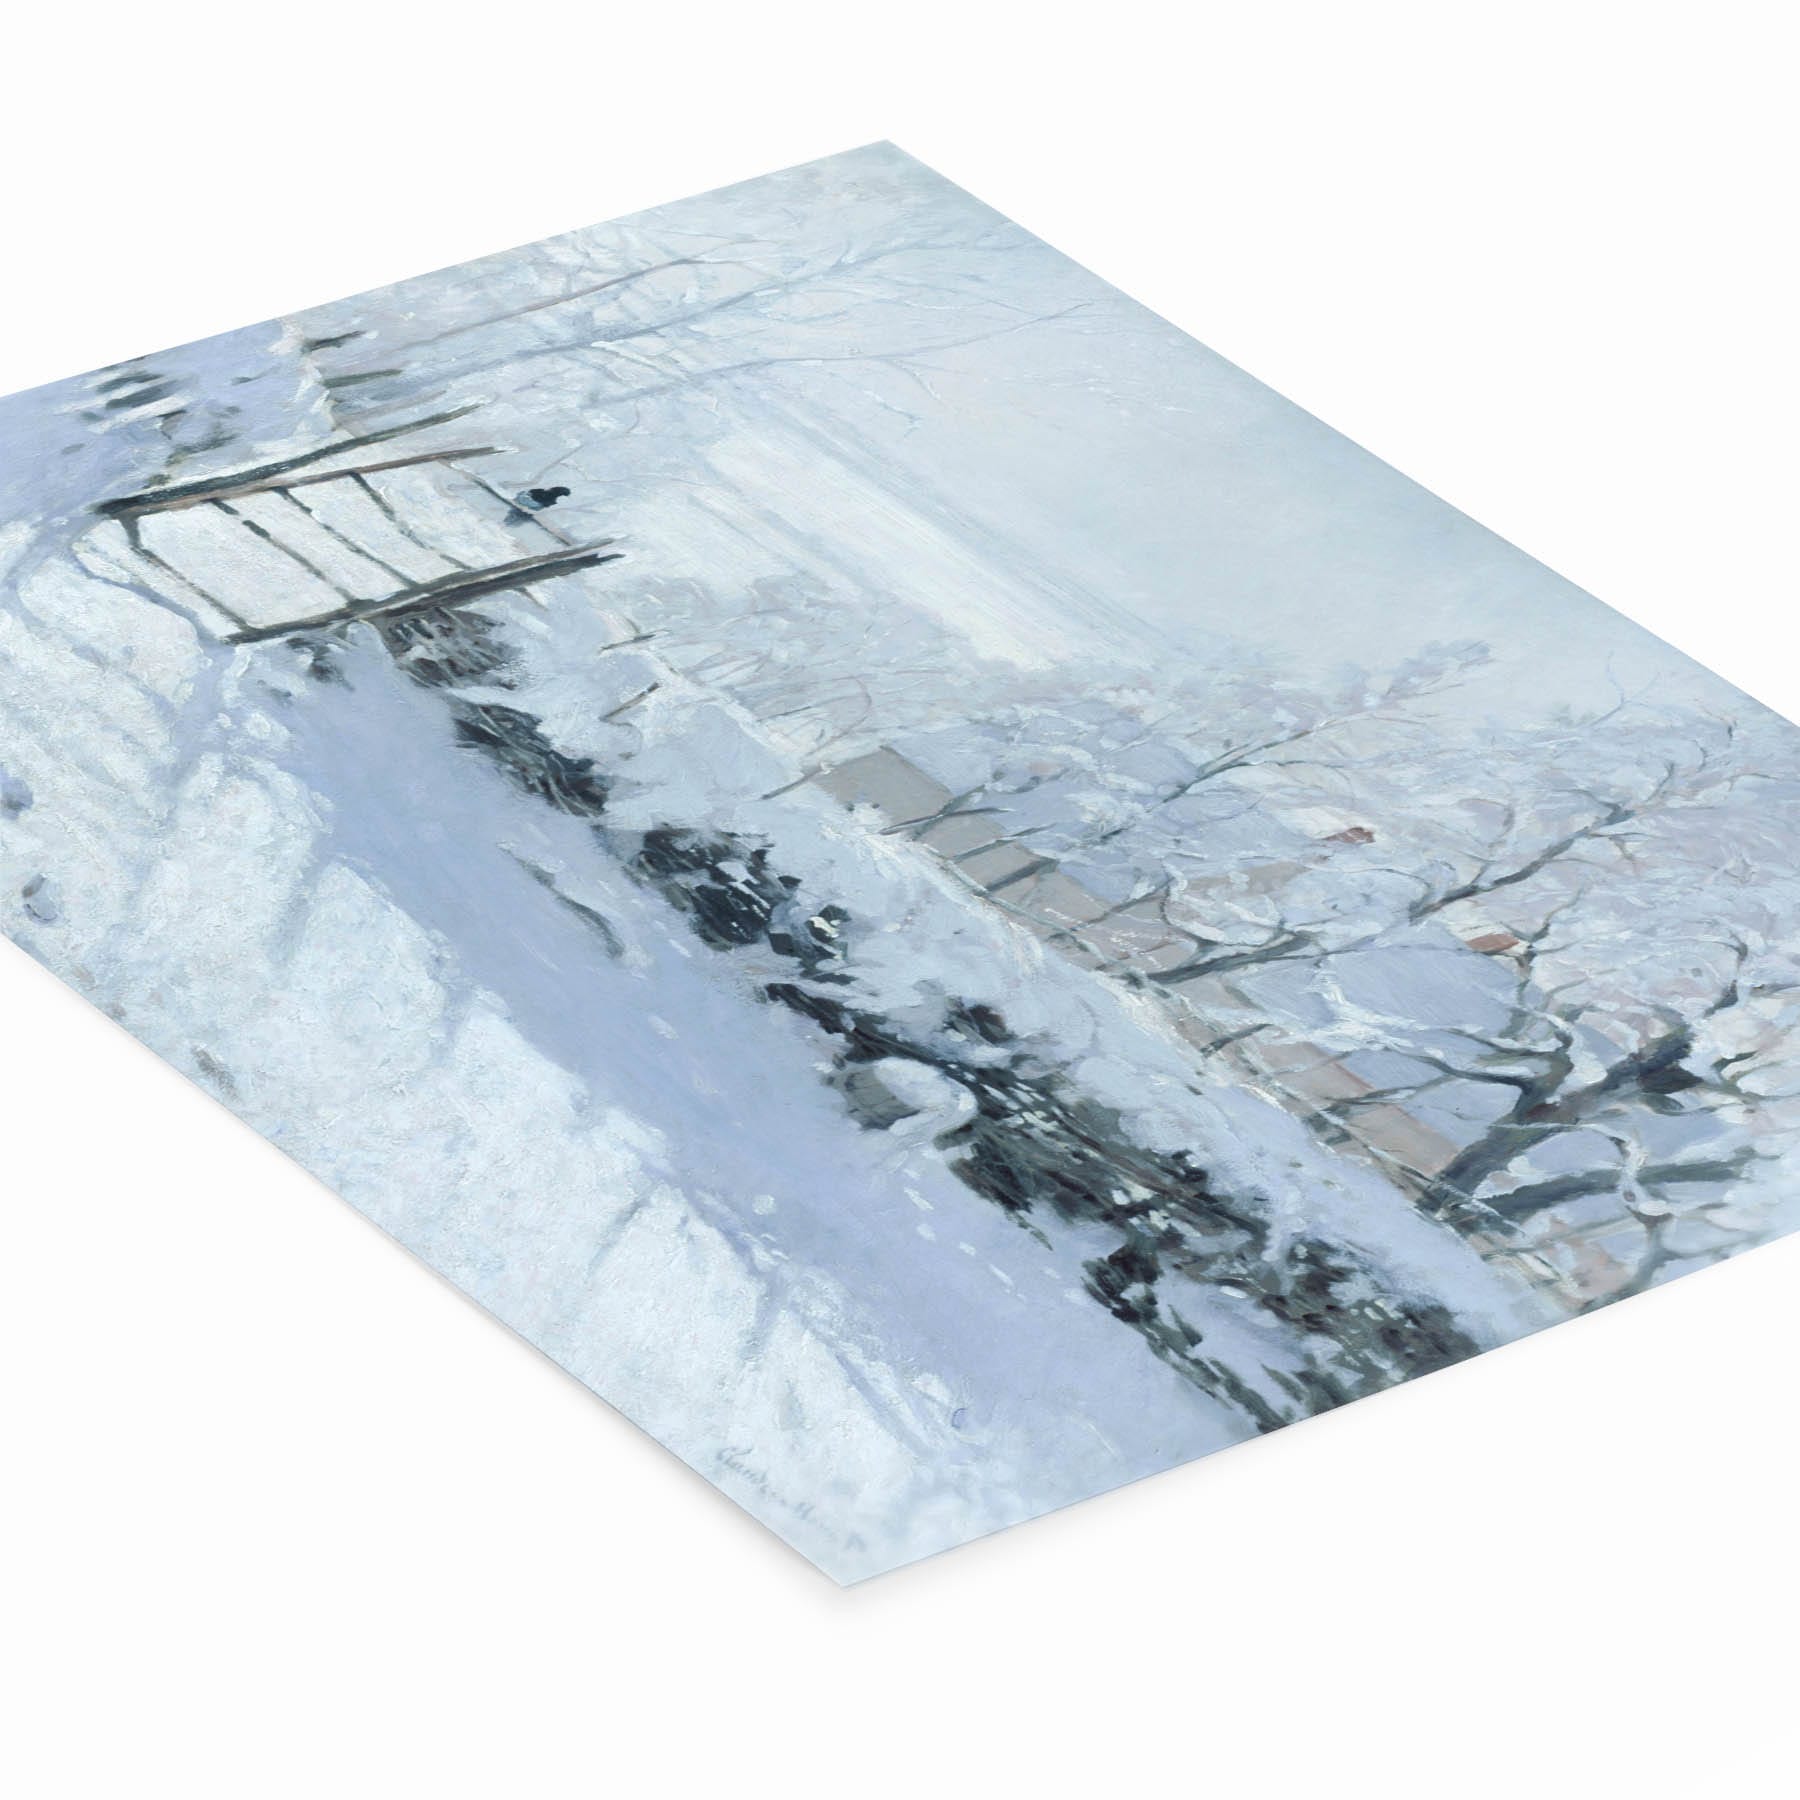 Winter Lanscape Art Print Laying Flat on a White Background